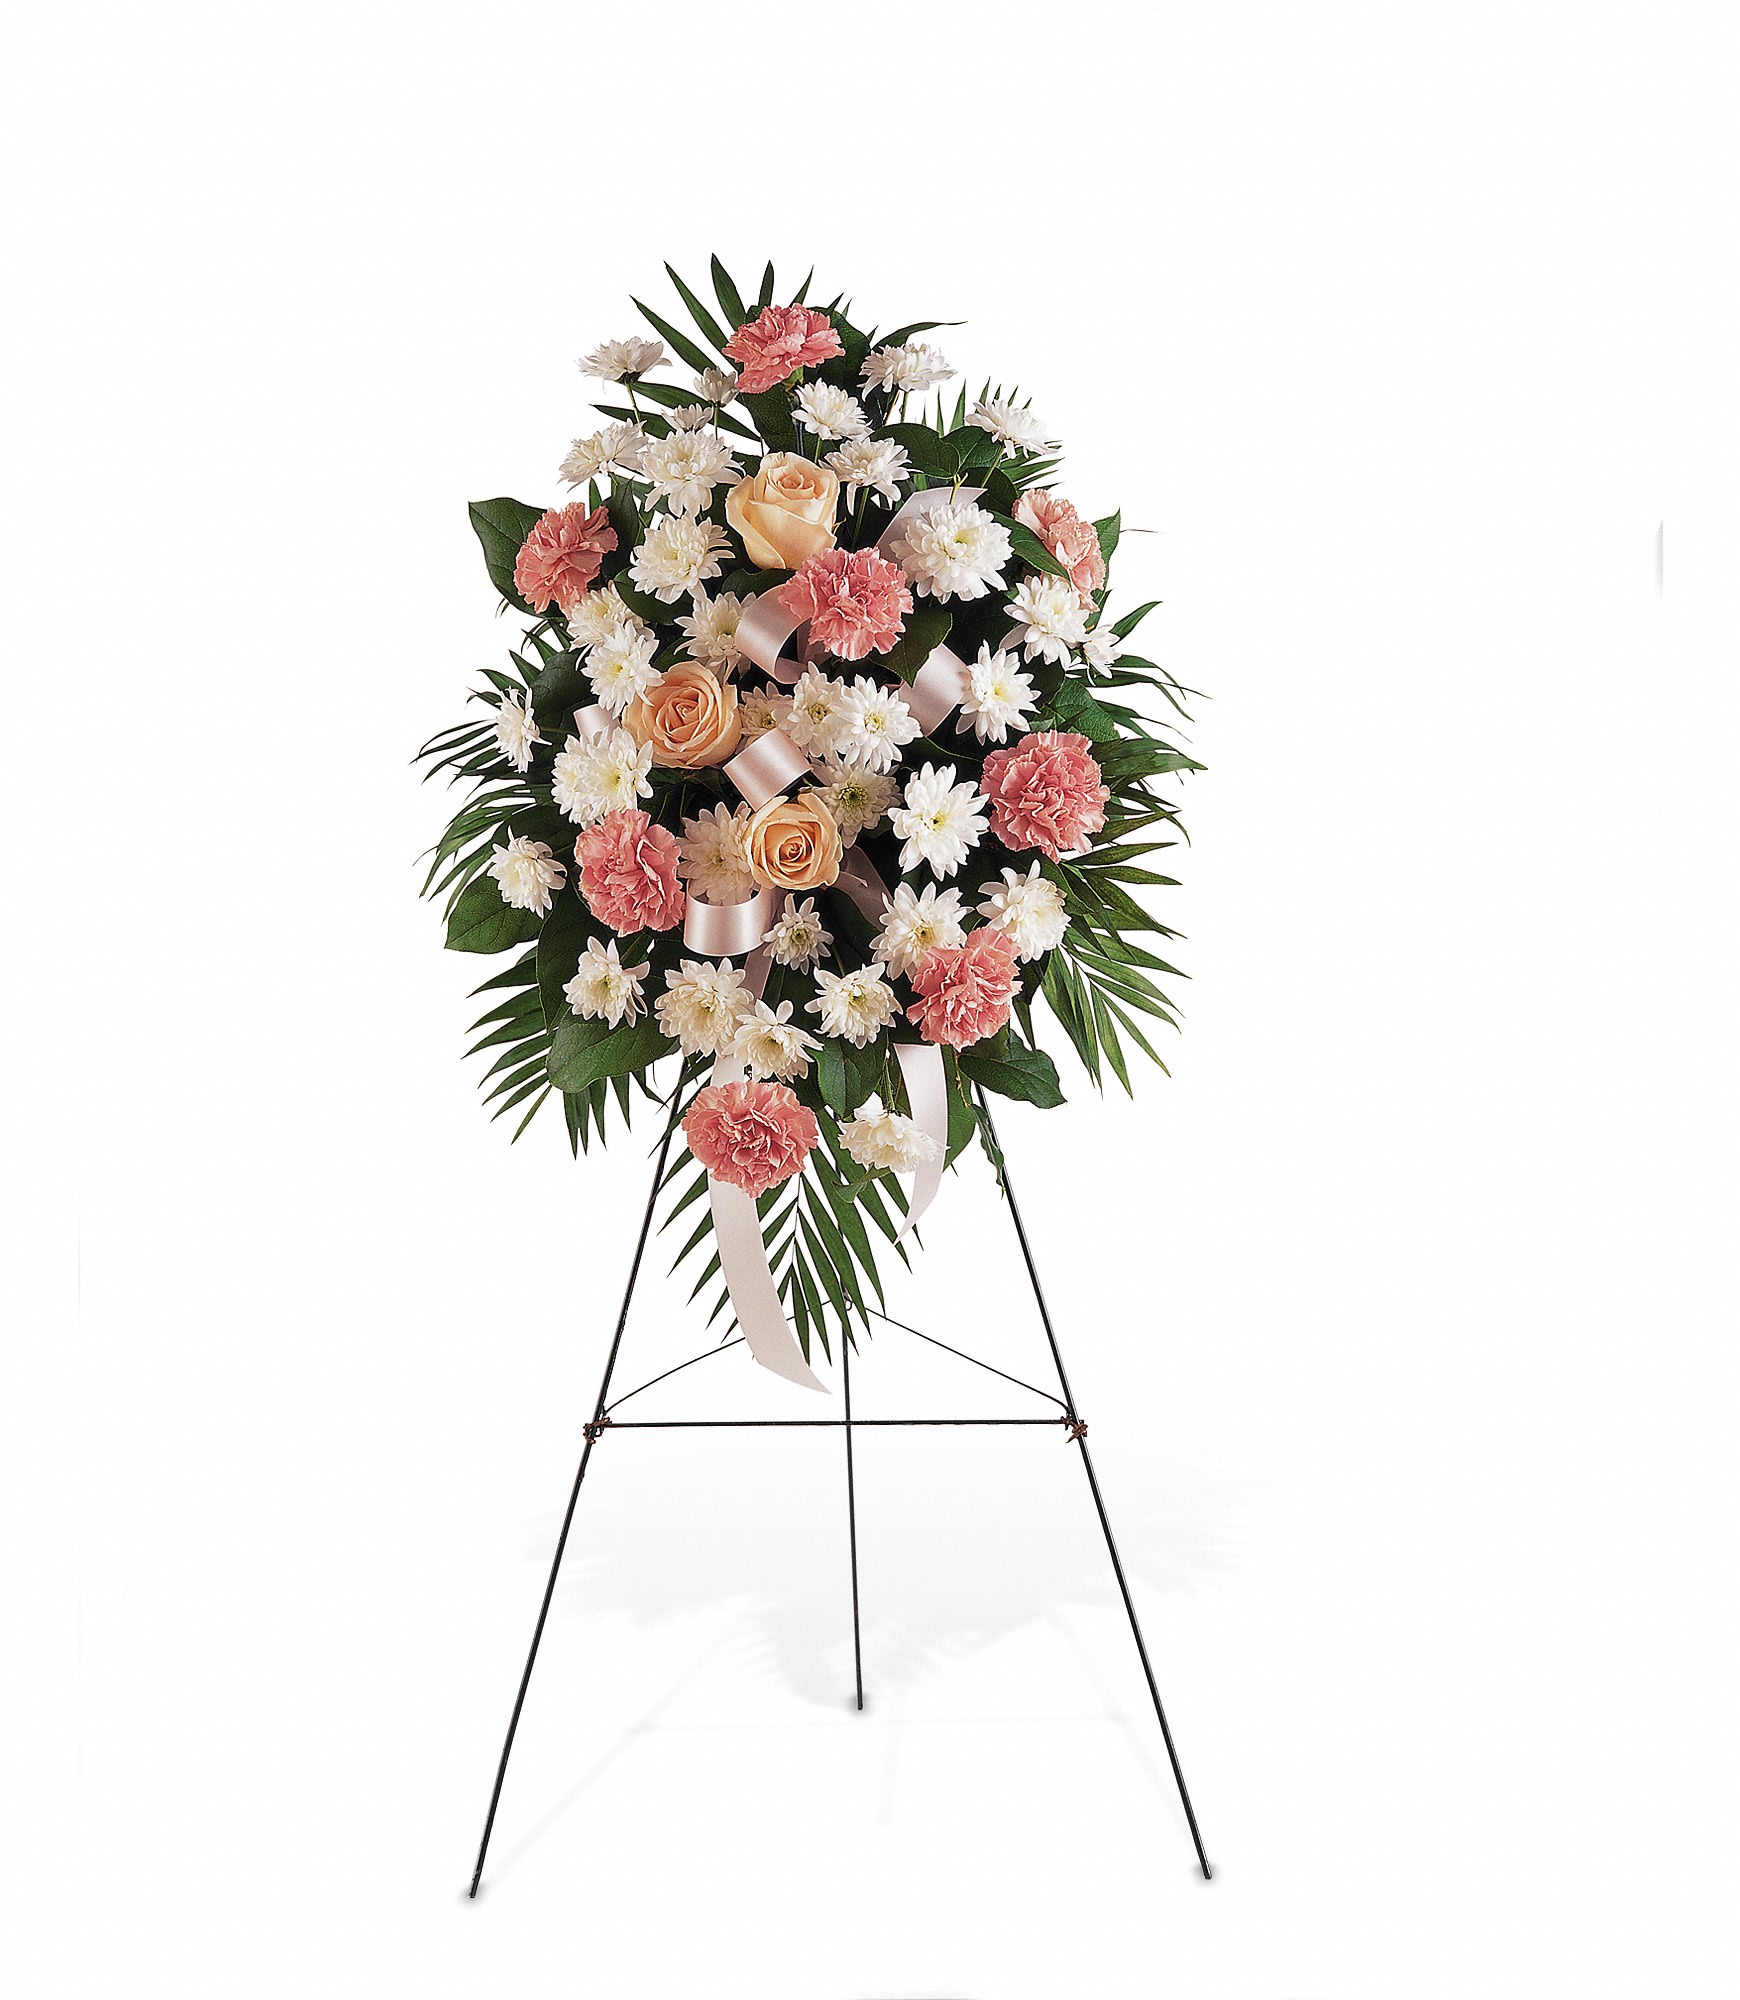 Gentle Thoughts Spray - The pink and white flowers of this lovely spray will express your deepest sympathy ever so gently to all in attendance. 